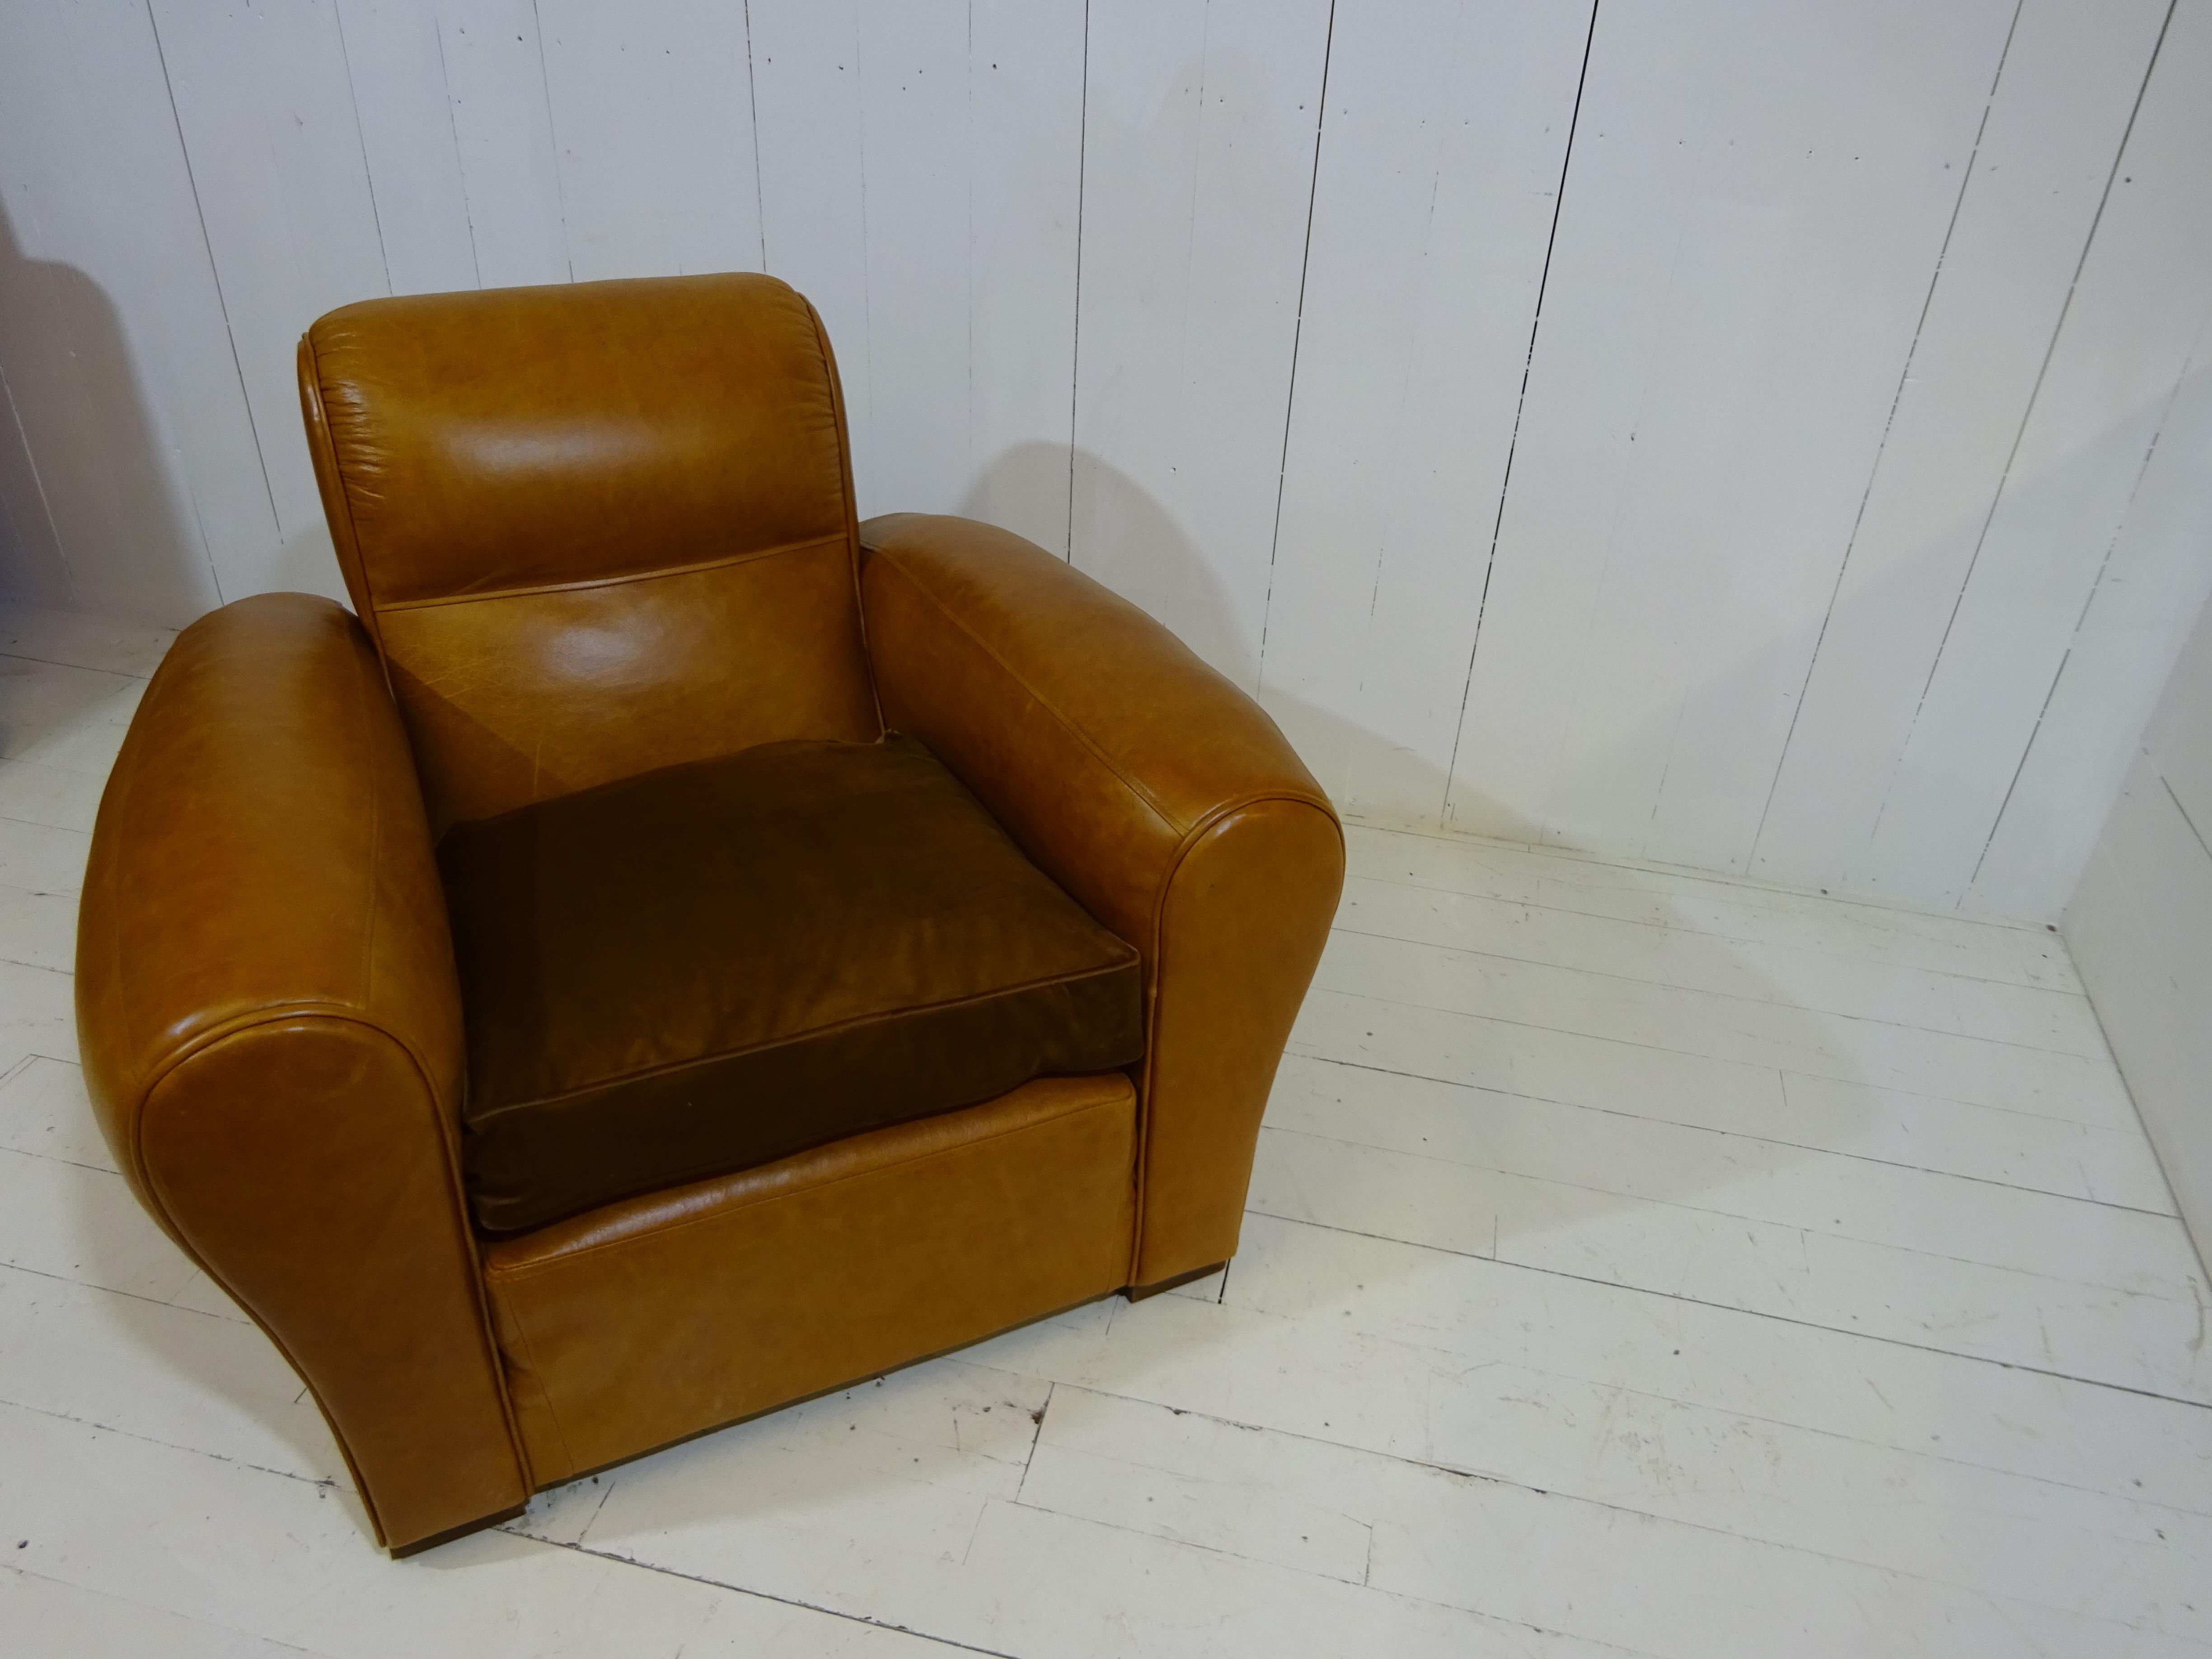 French 1920's Art Deco Club Chair in Distressed Caramel Aniline Leather